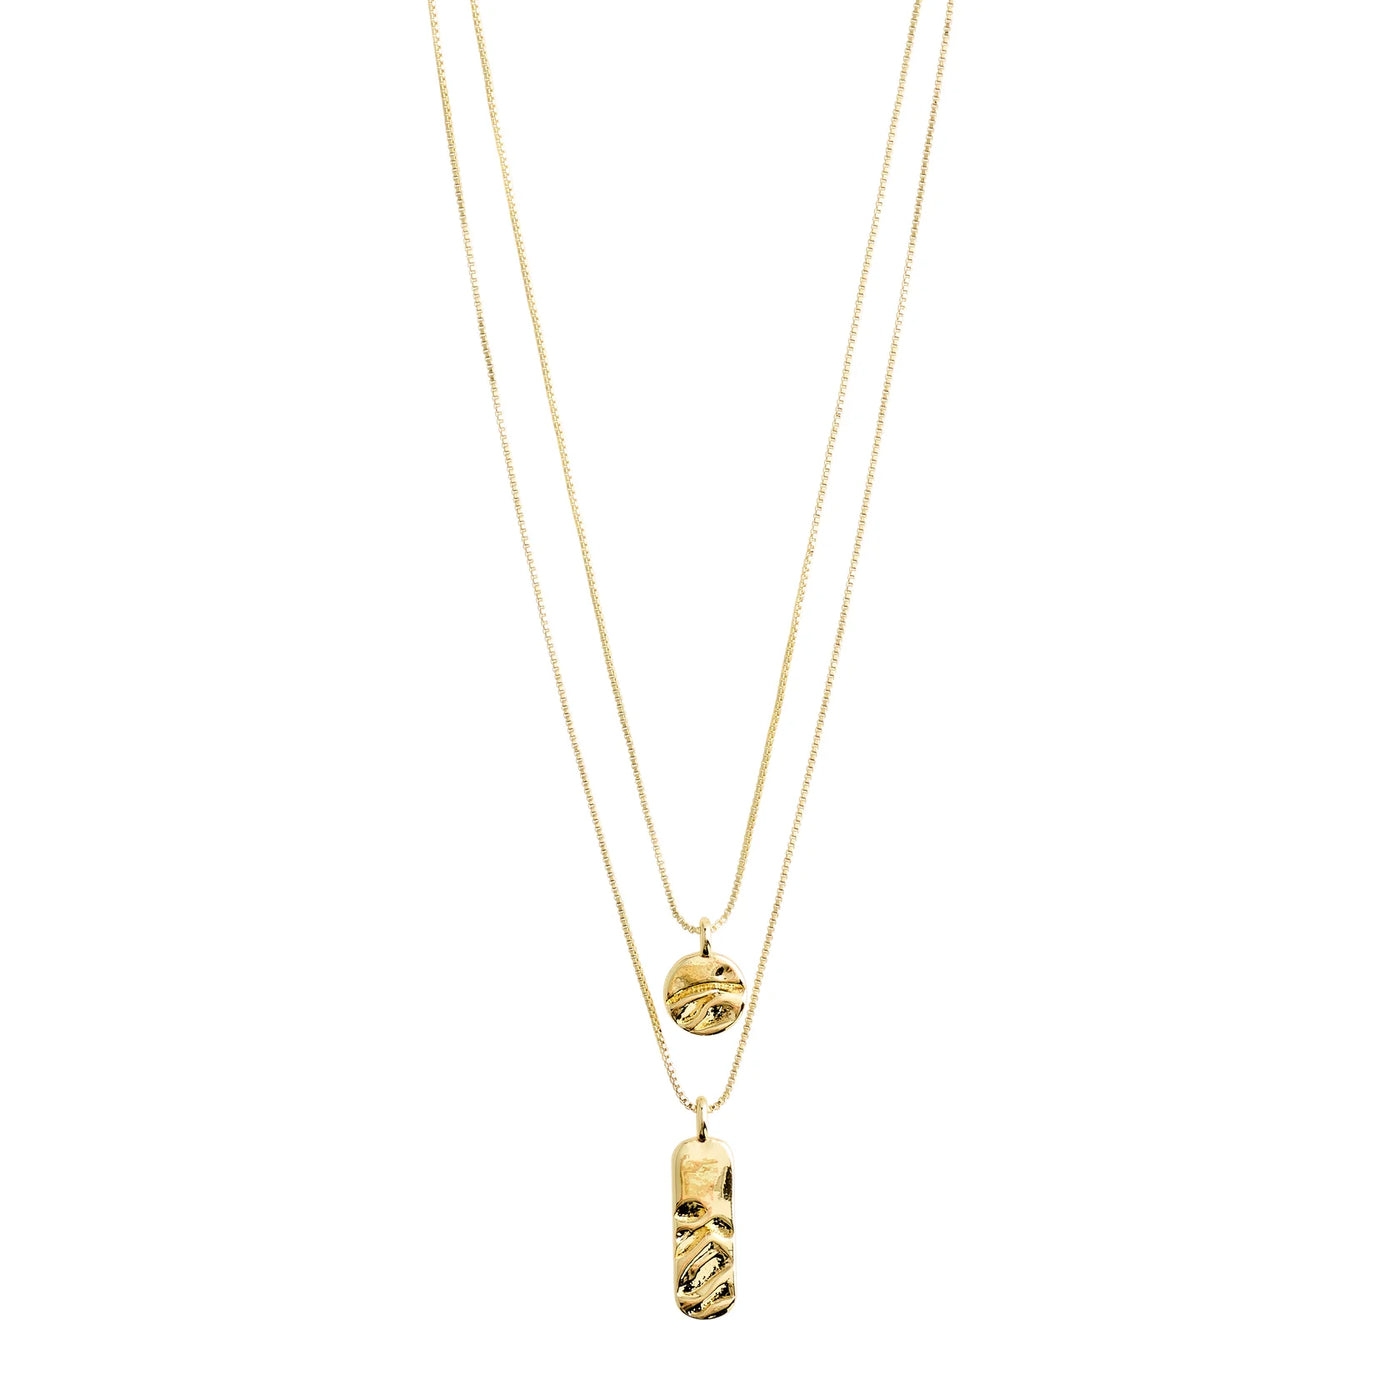 Blink 2-in-1 Necklace, Gold